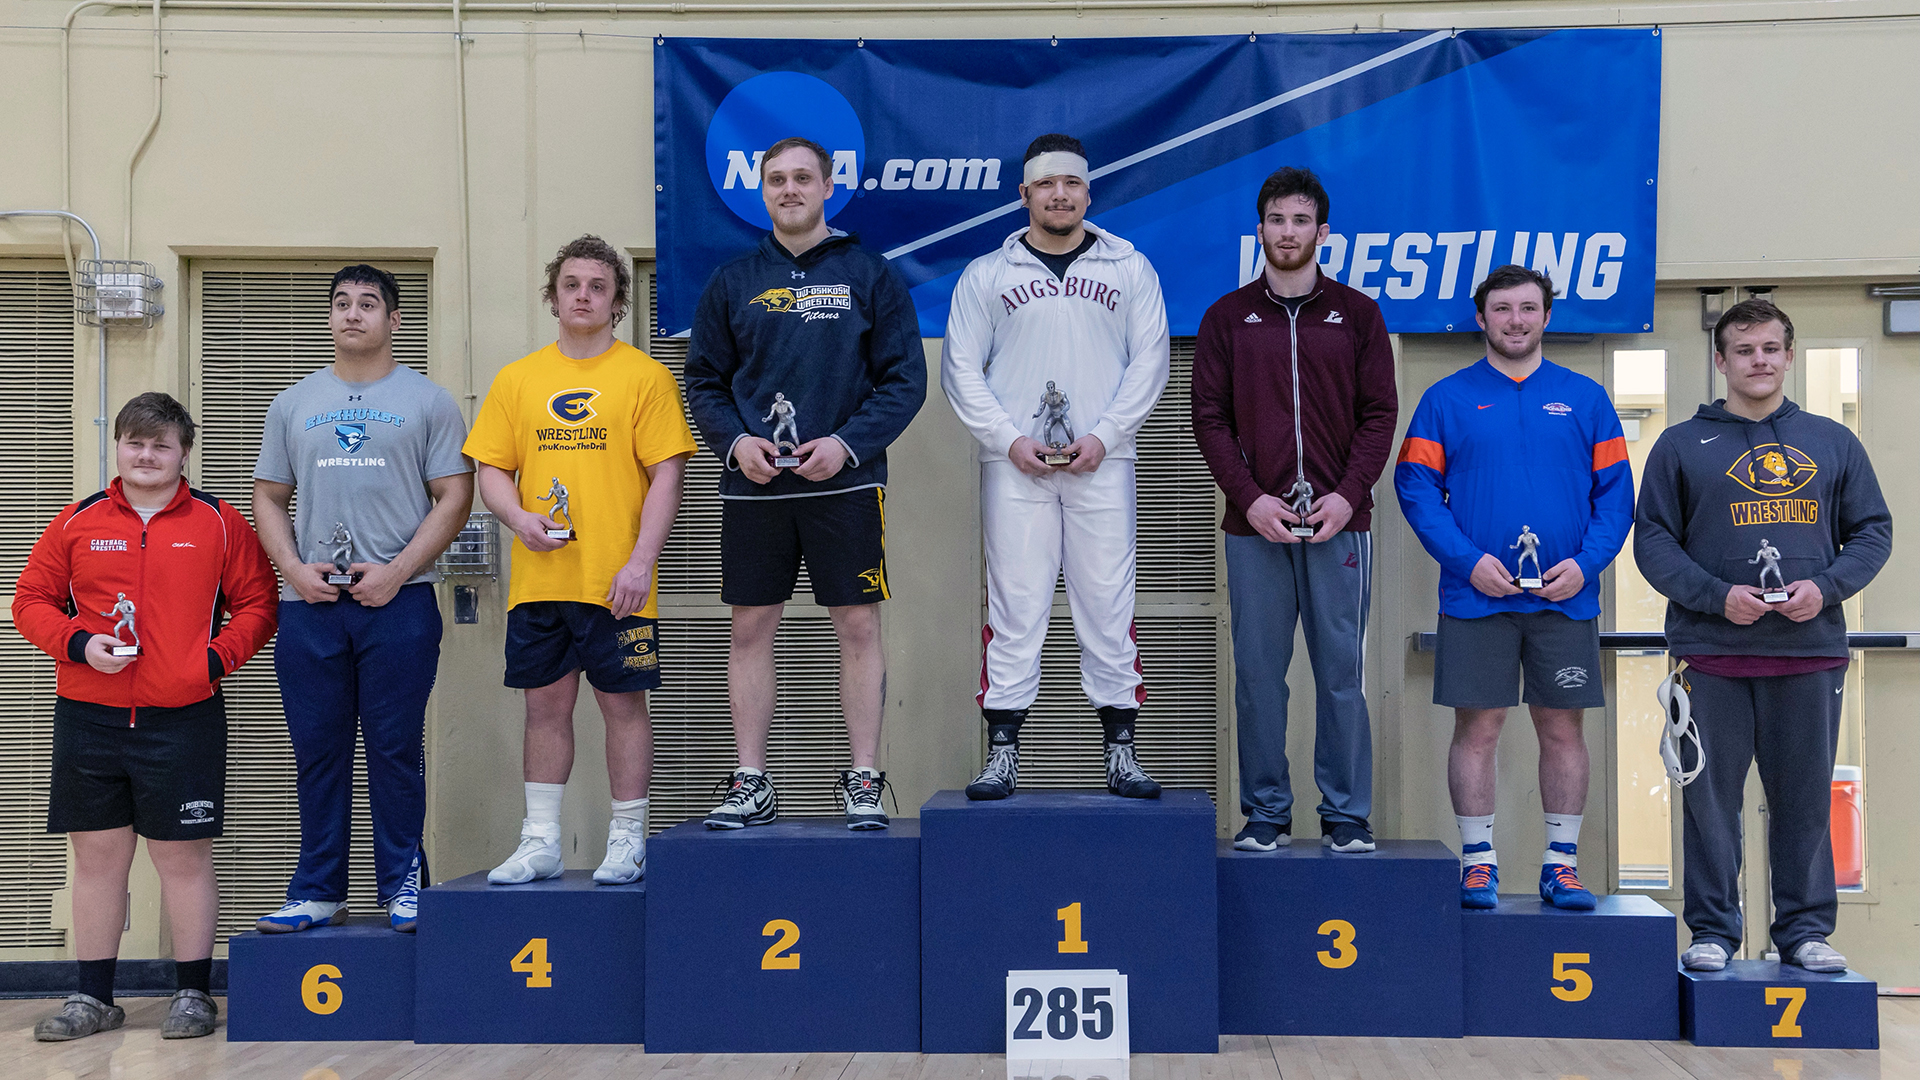 Jordan Lemcke finished second in the 285-pound weight class at the NCAA Division III Upper Midwest Regional.